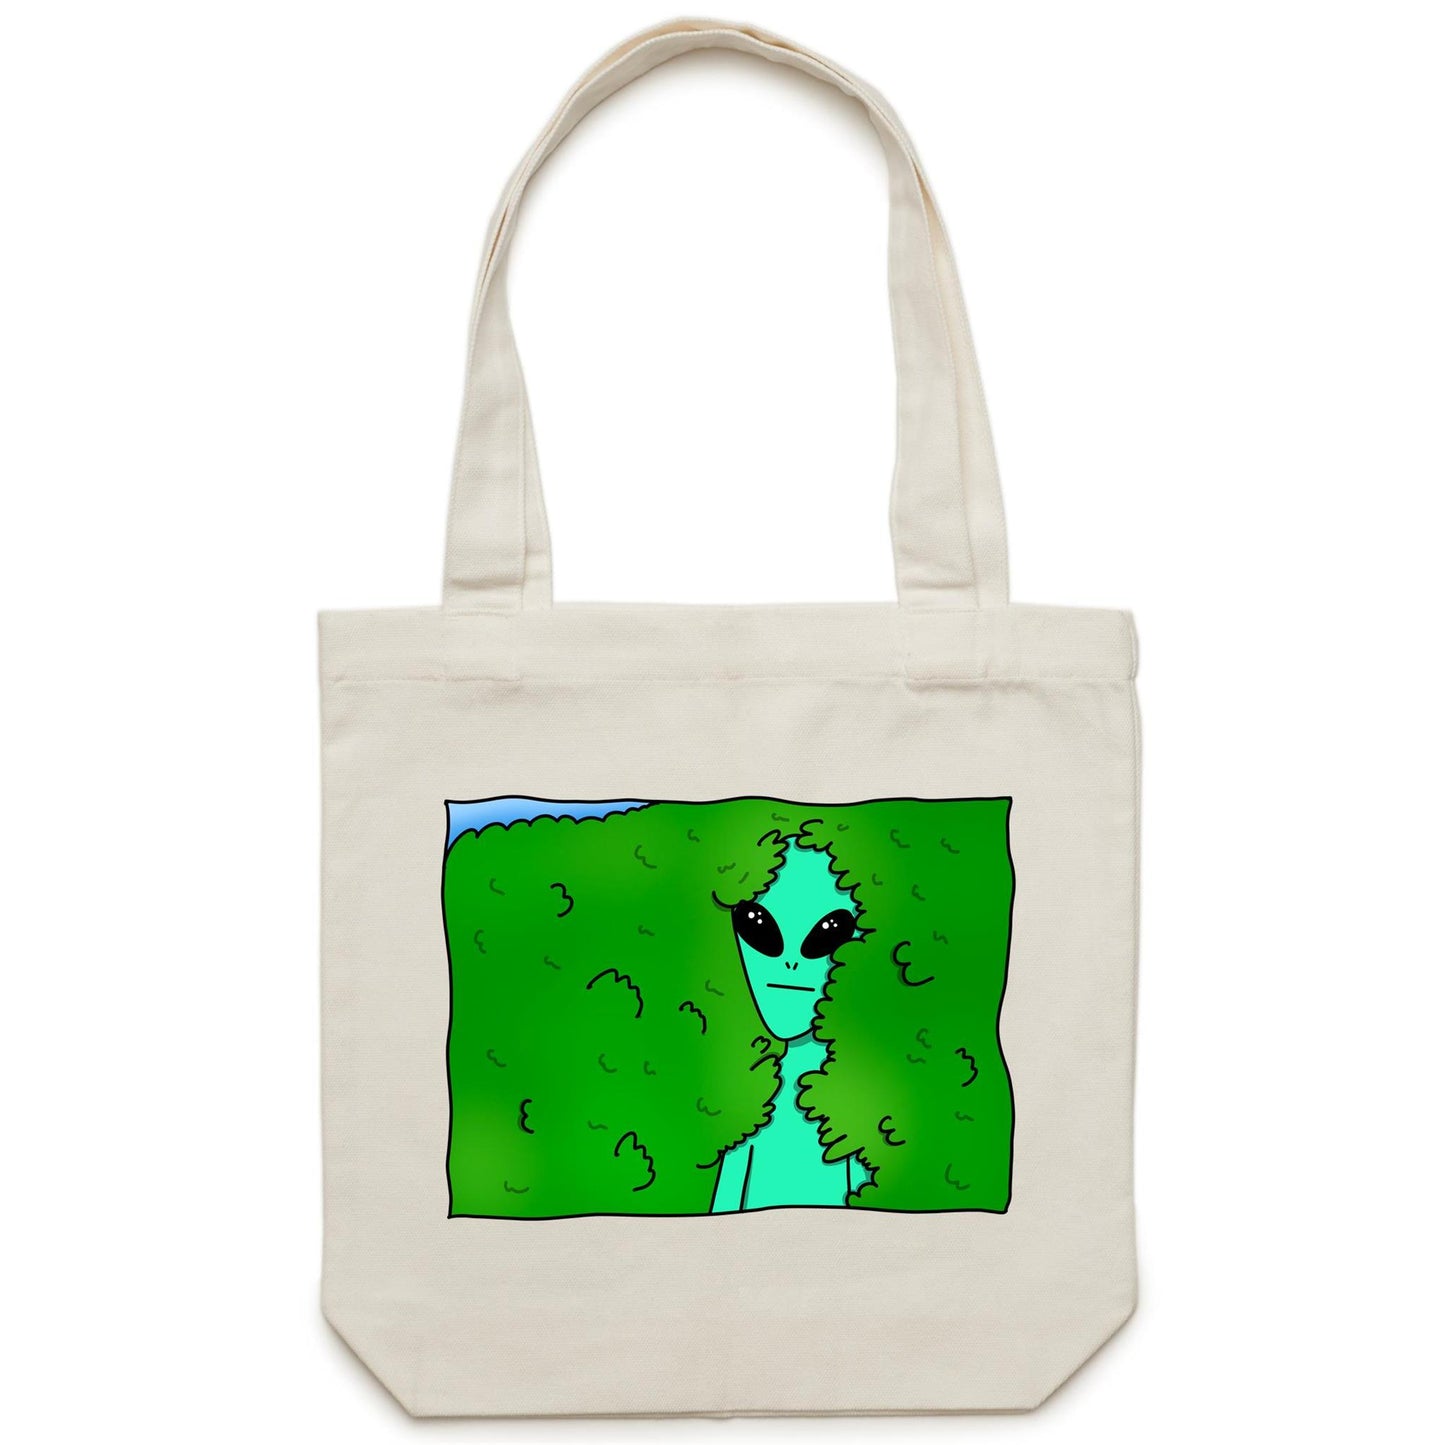 Alien Backing Into Hedge Meme - Canvas Tote Bag Cream One Size Tote Bag Funny Sci Fi